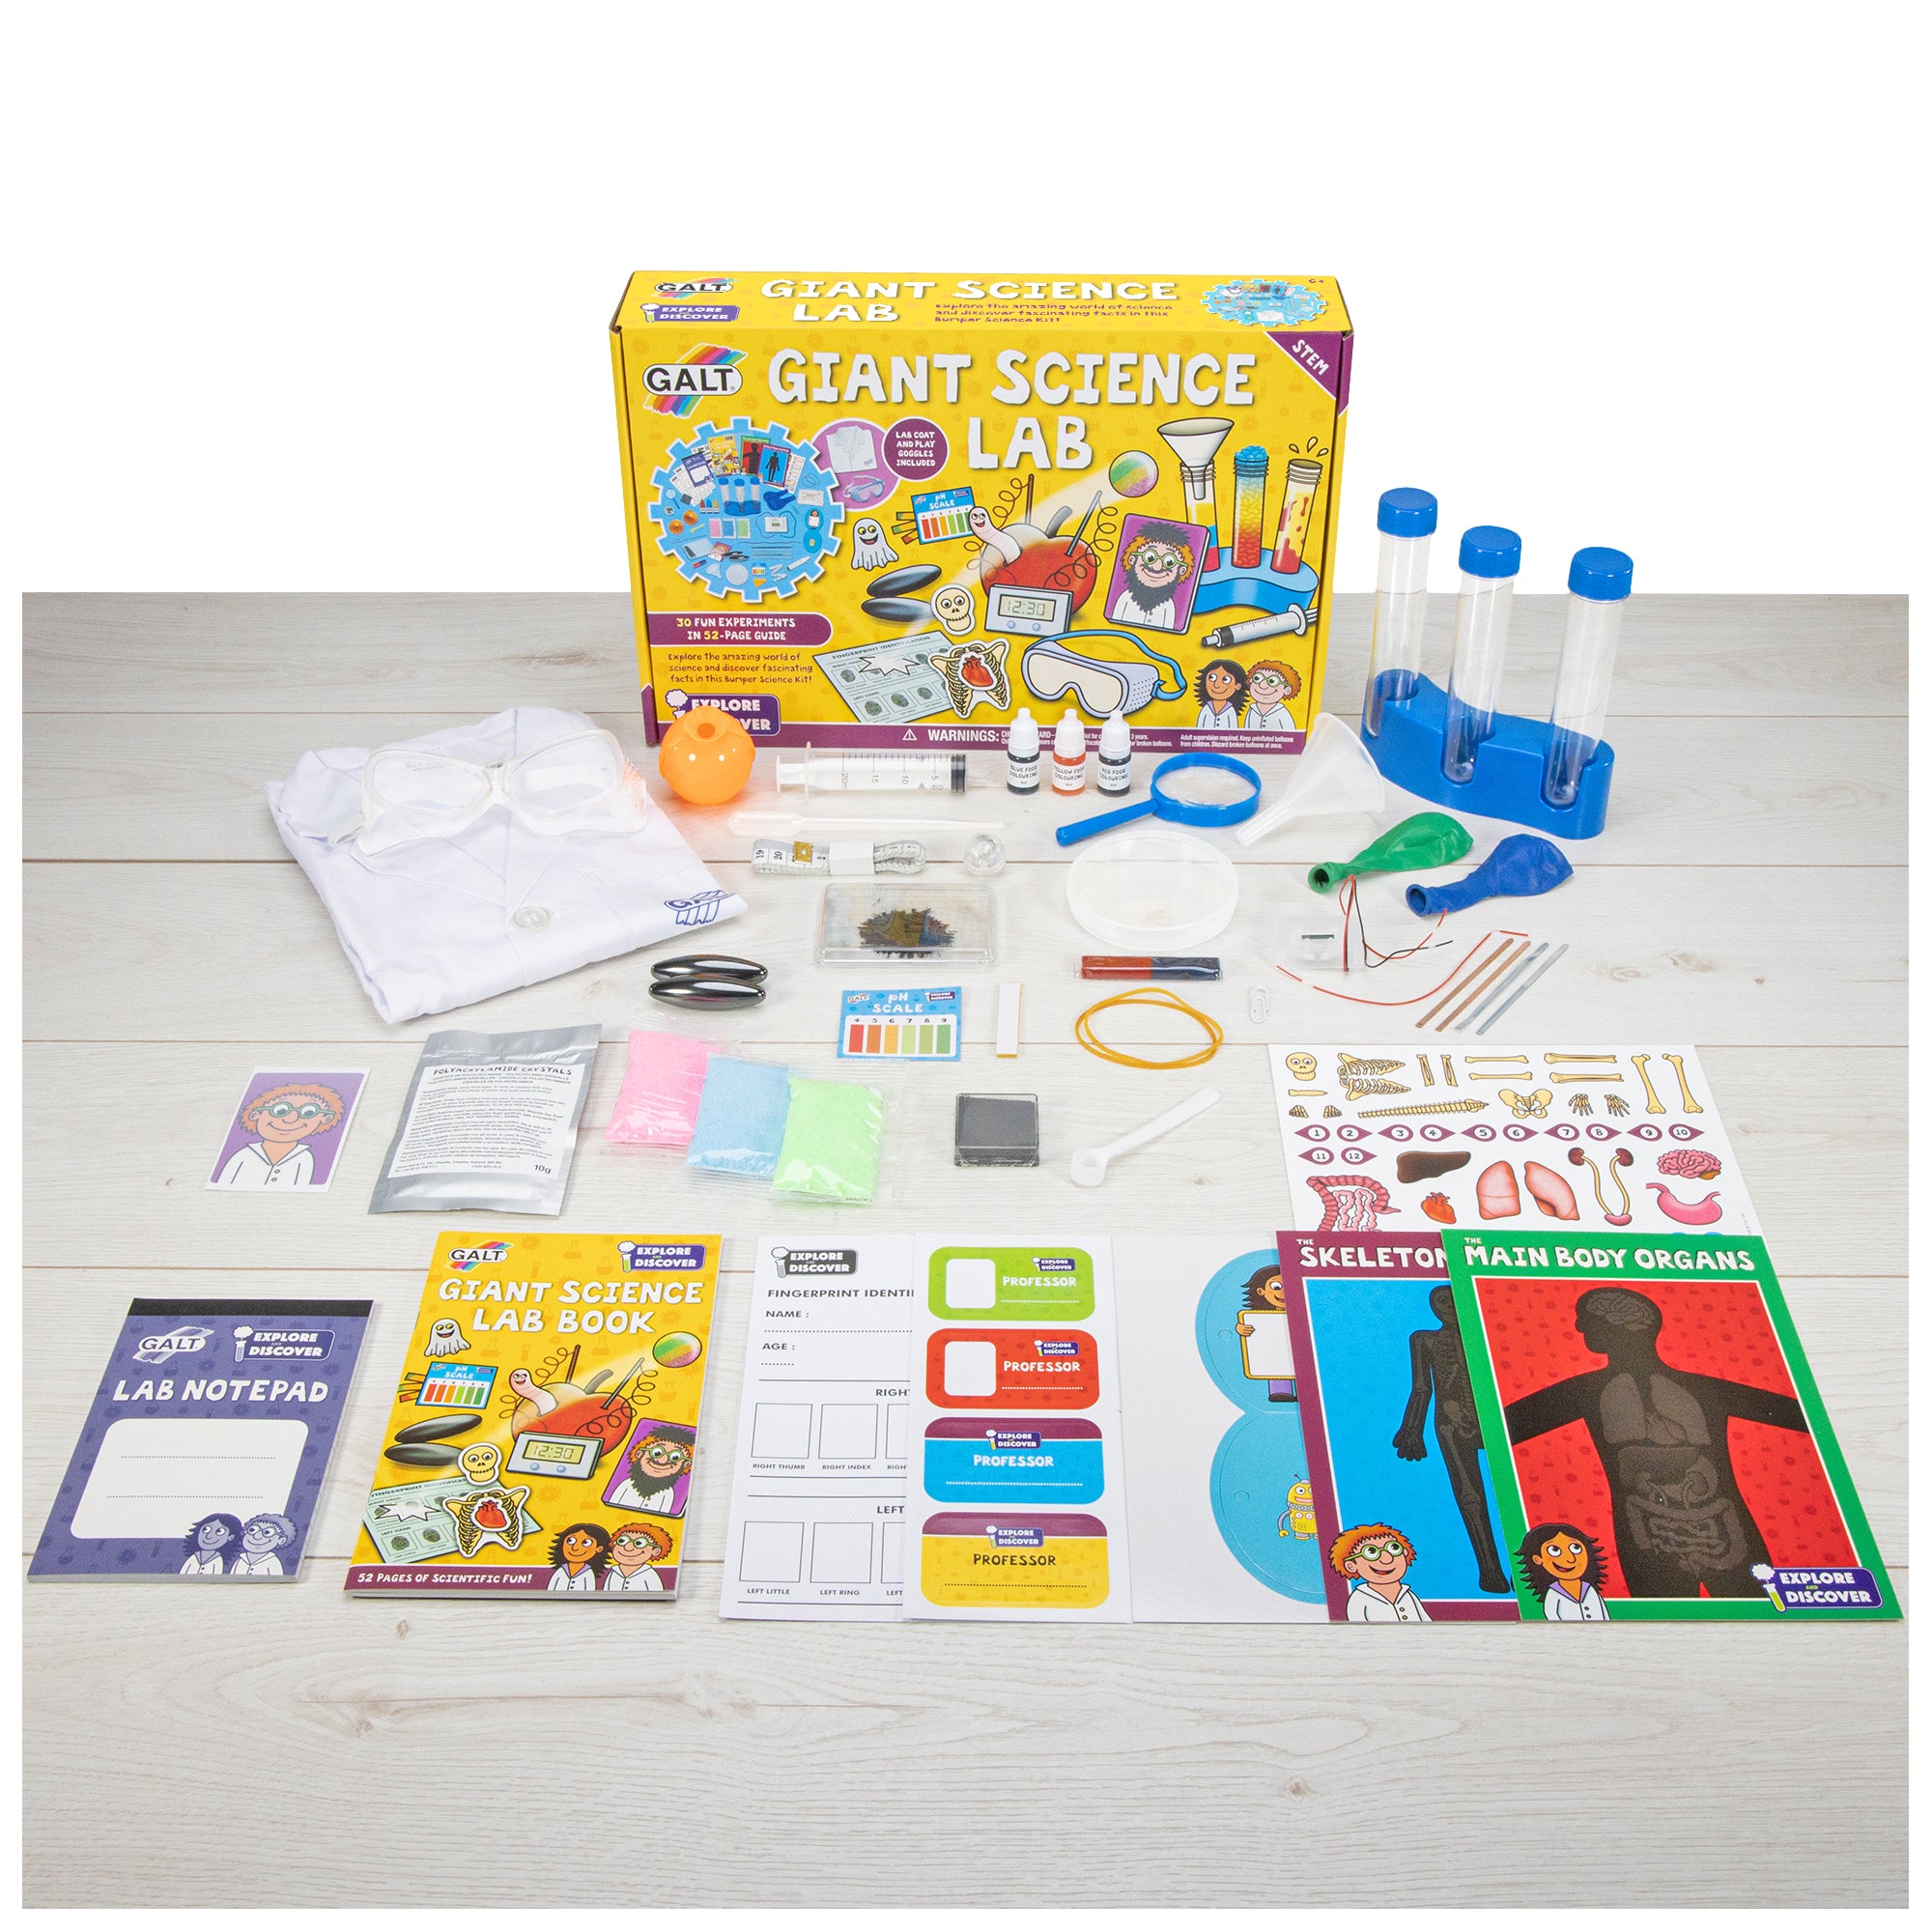 Contents of children's science lab - discover and explore with galt toys - Giant Science Lab for children